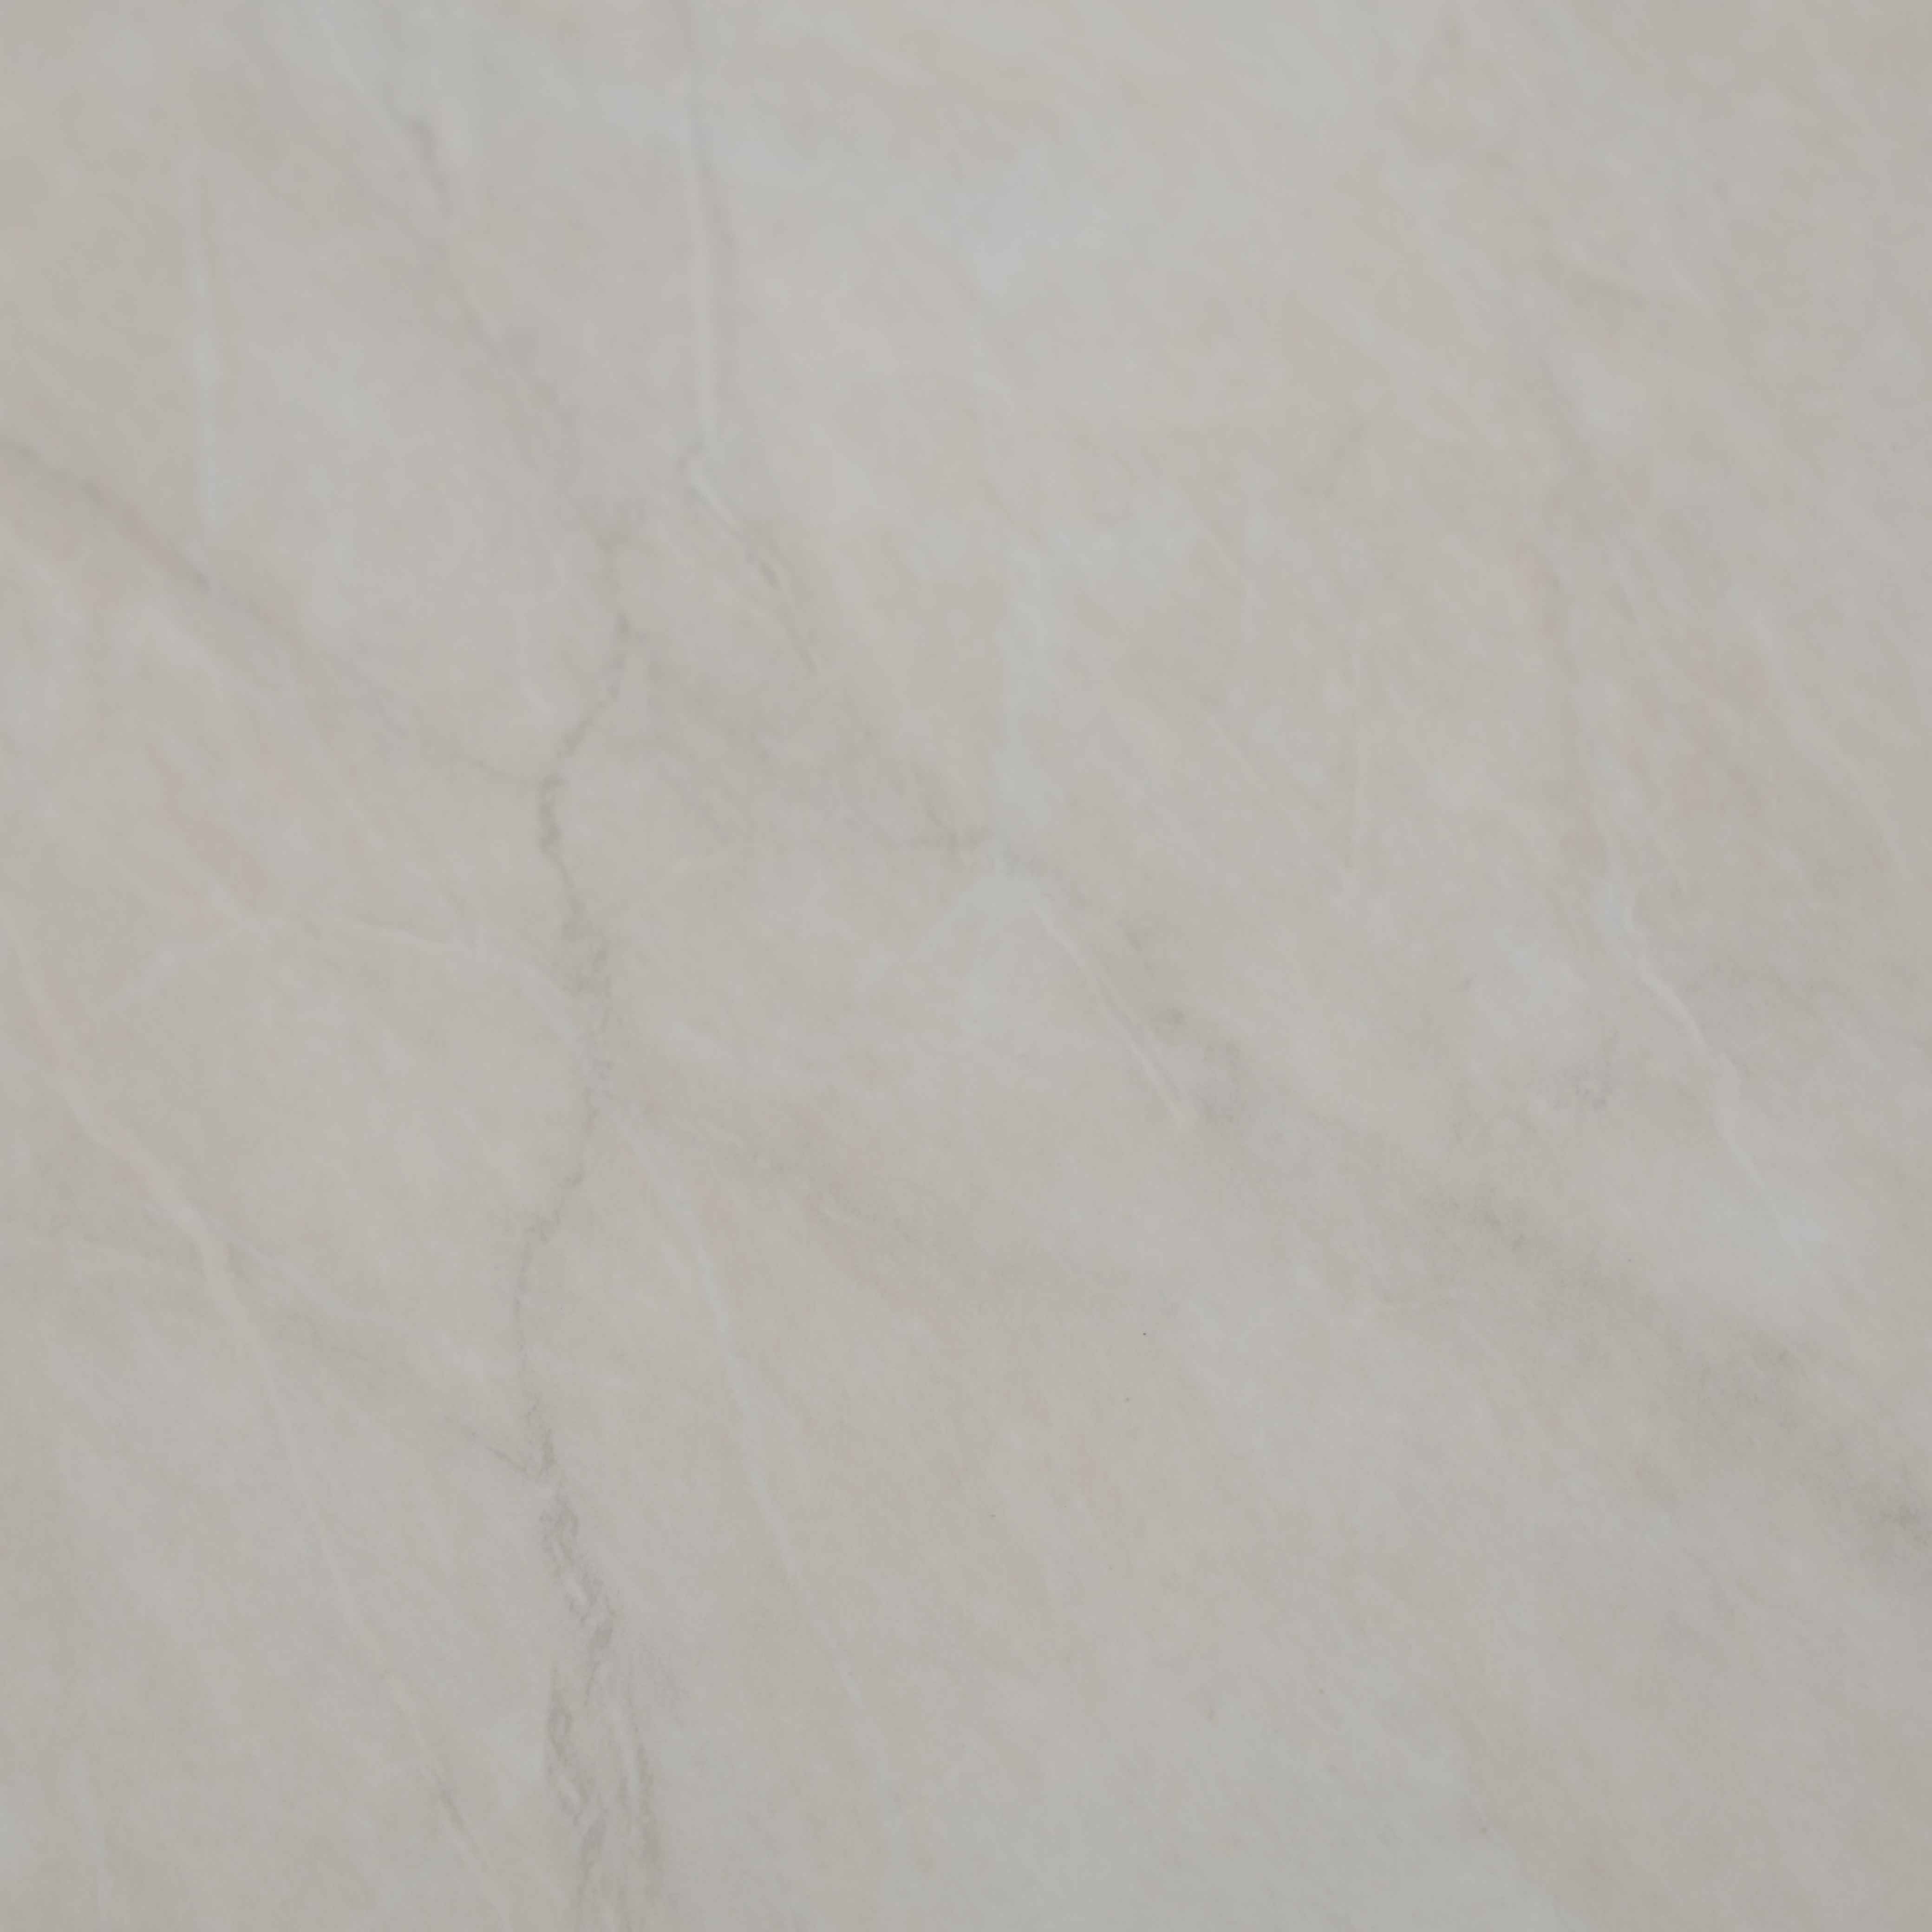 Sample of Beige Marble 10mm Bathroom Cladding Shower Wall Panels